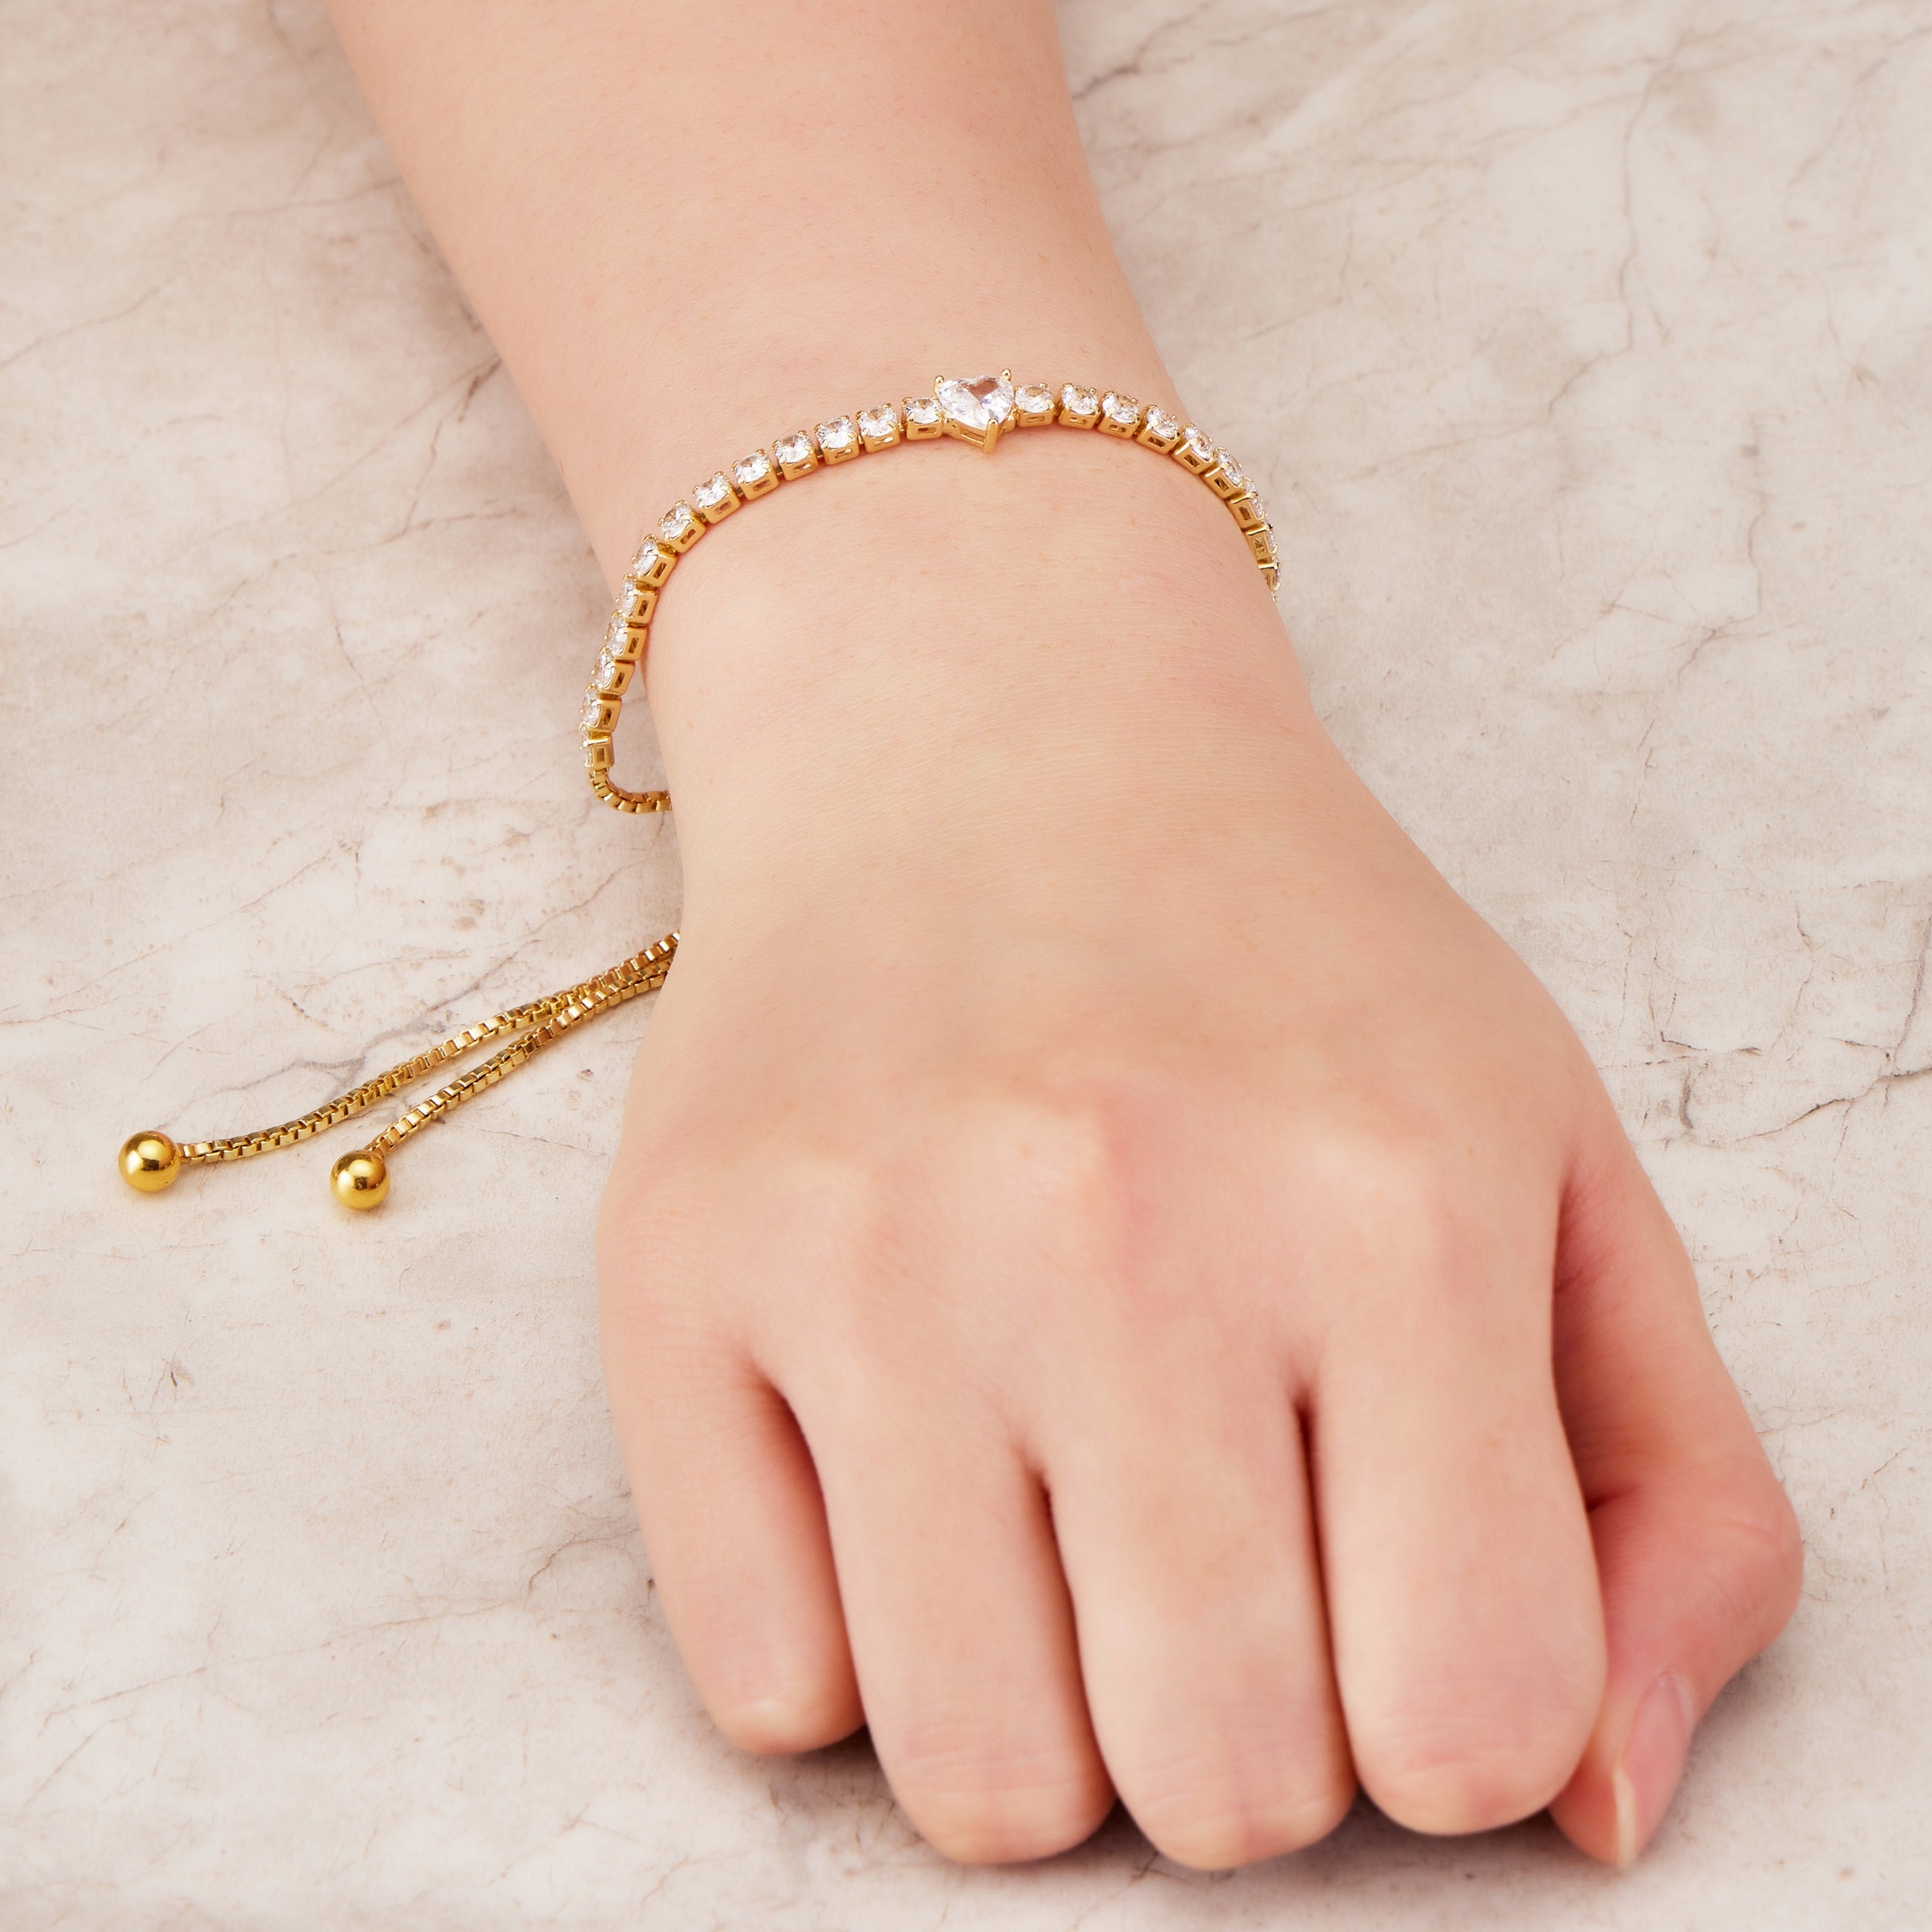 Gold Plated Heart Solitaire Friendship Bracelet Created with Zircondia® Crystals